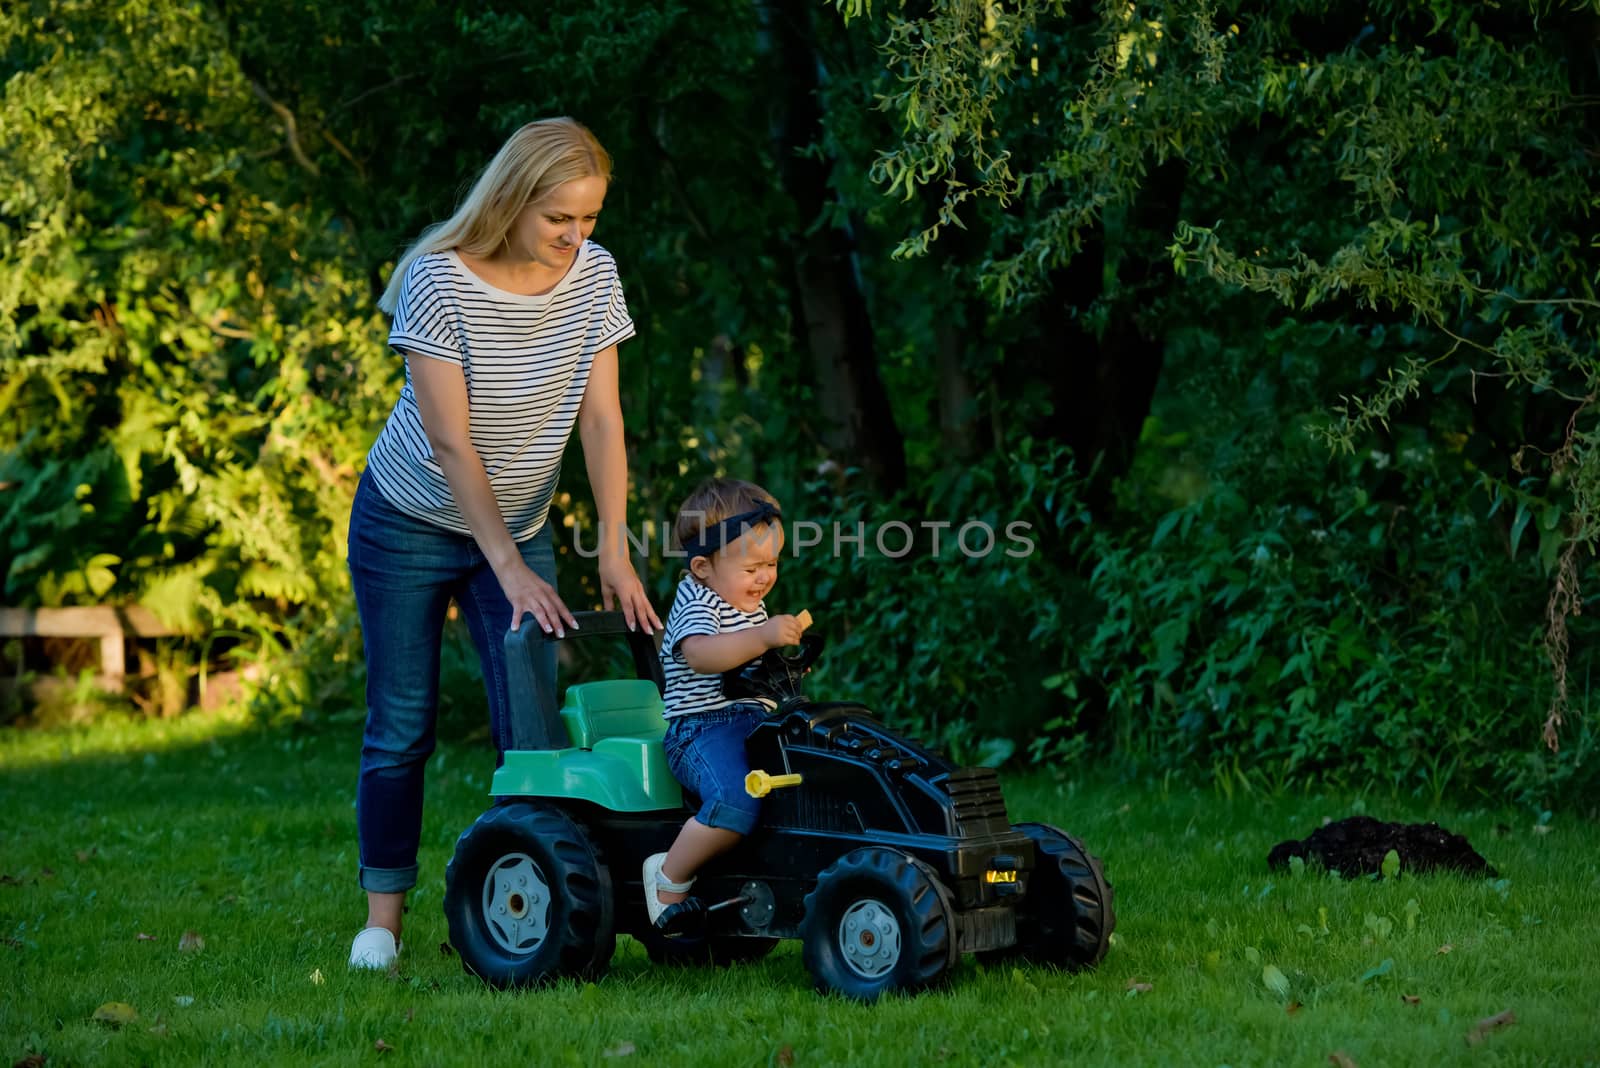 Baby girl and mother playing with toy tractor in a garden.